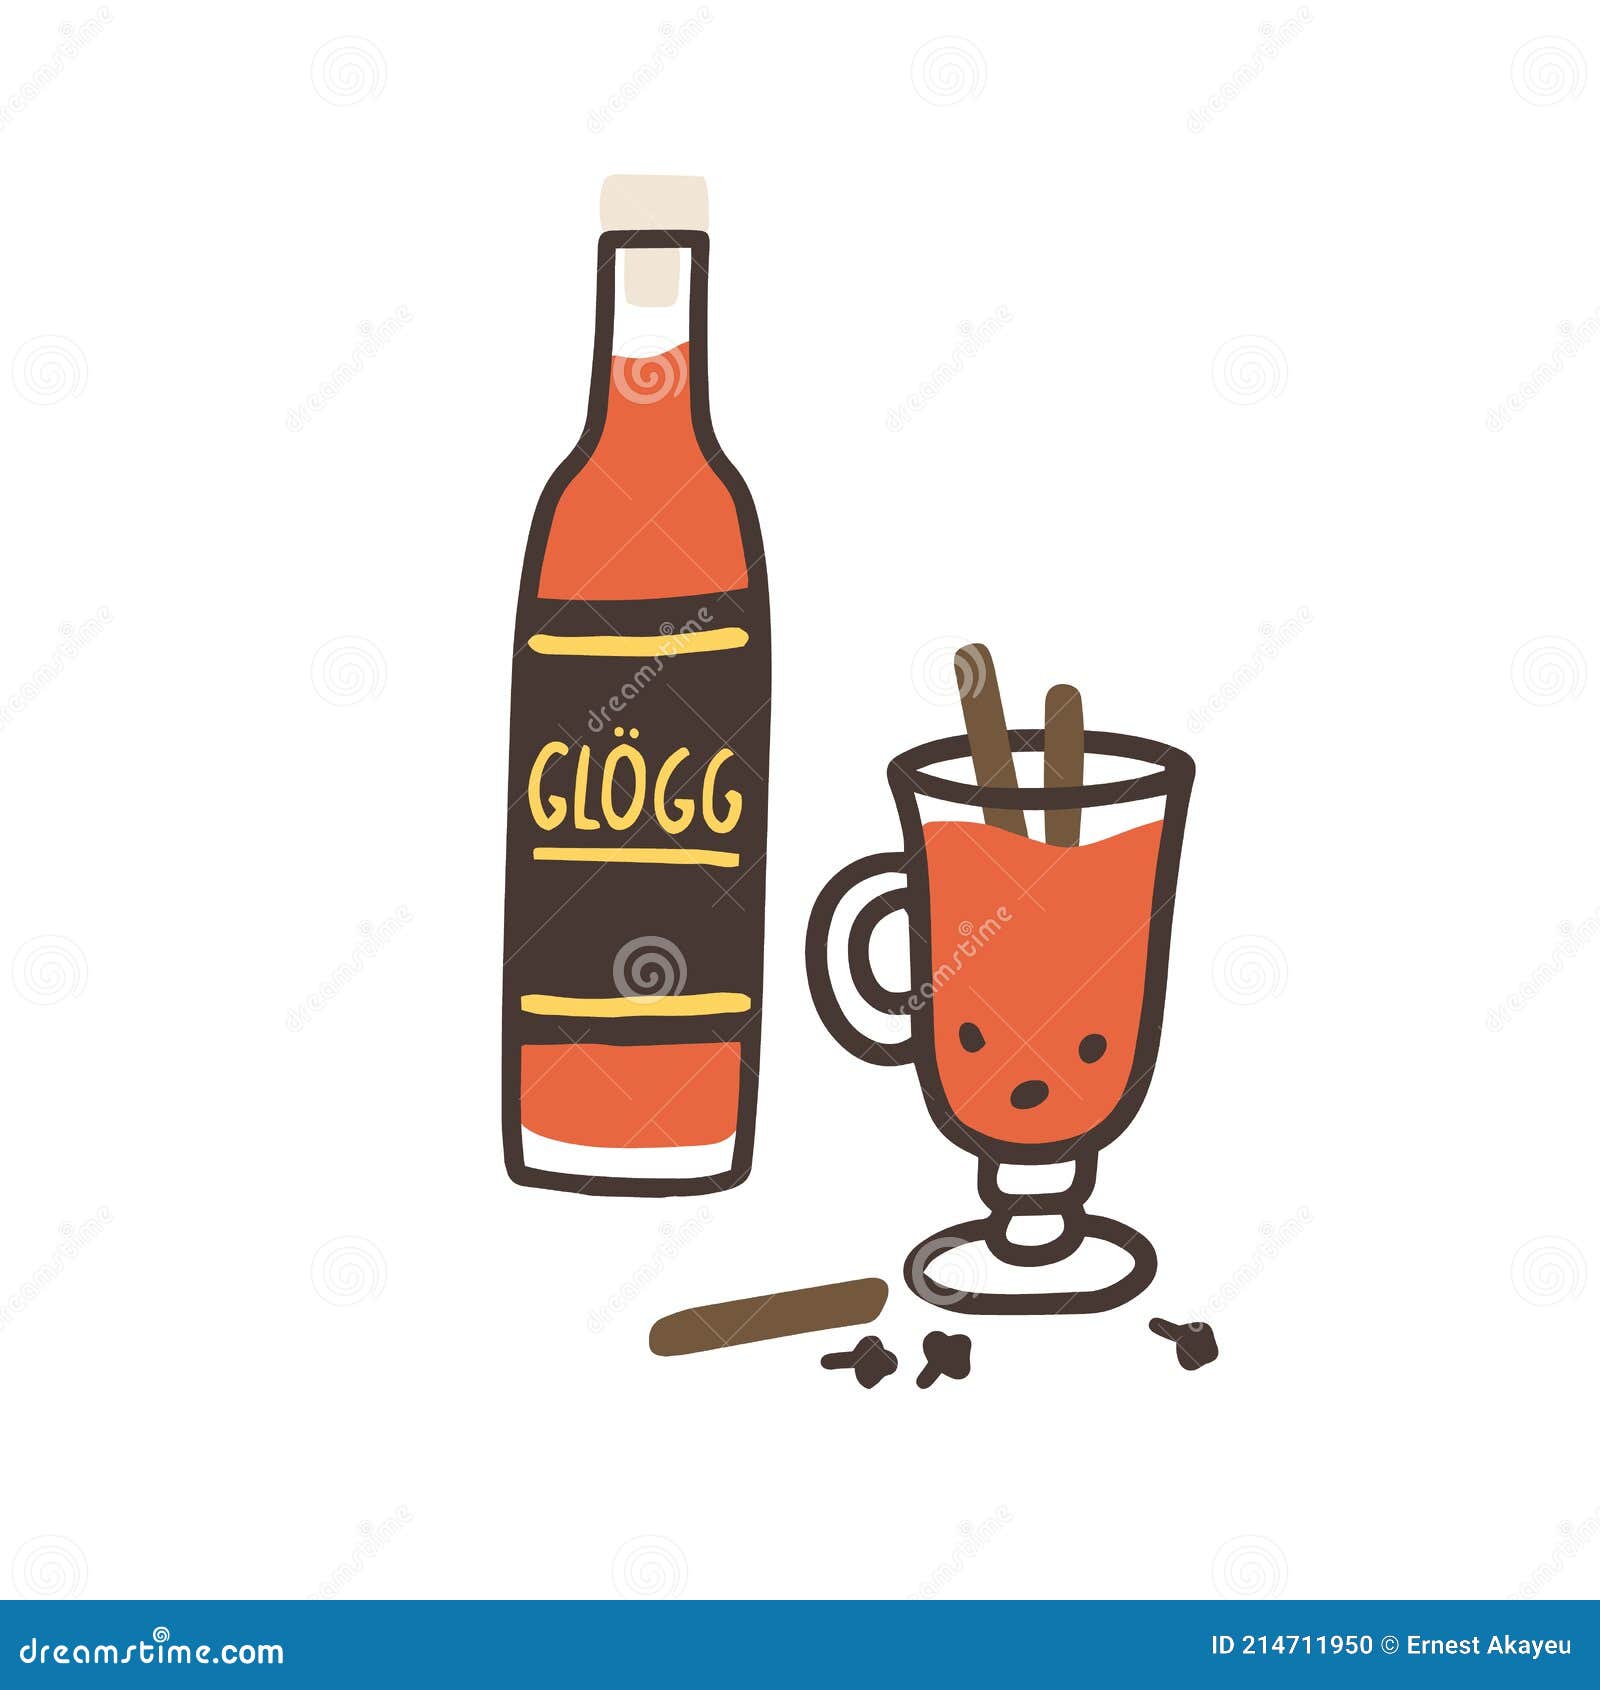 glogg or nordic traditional alcoholic drink from wine and winter spices. bottle and glass of swedish beverage. colored